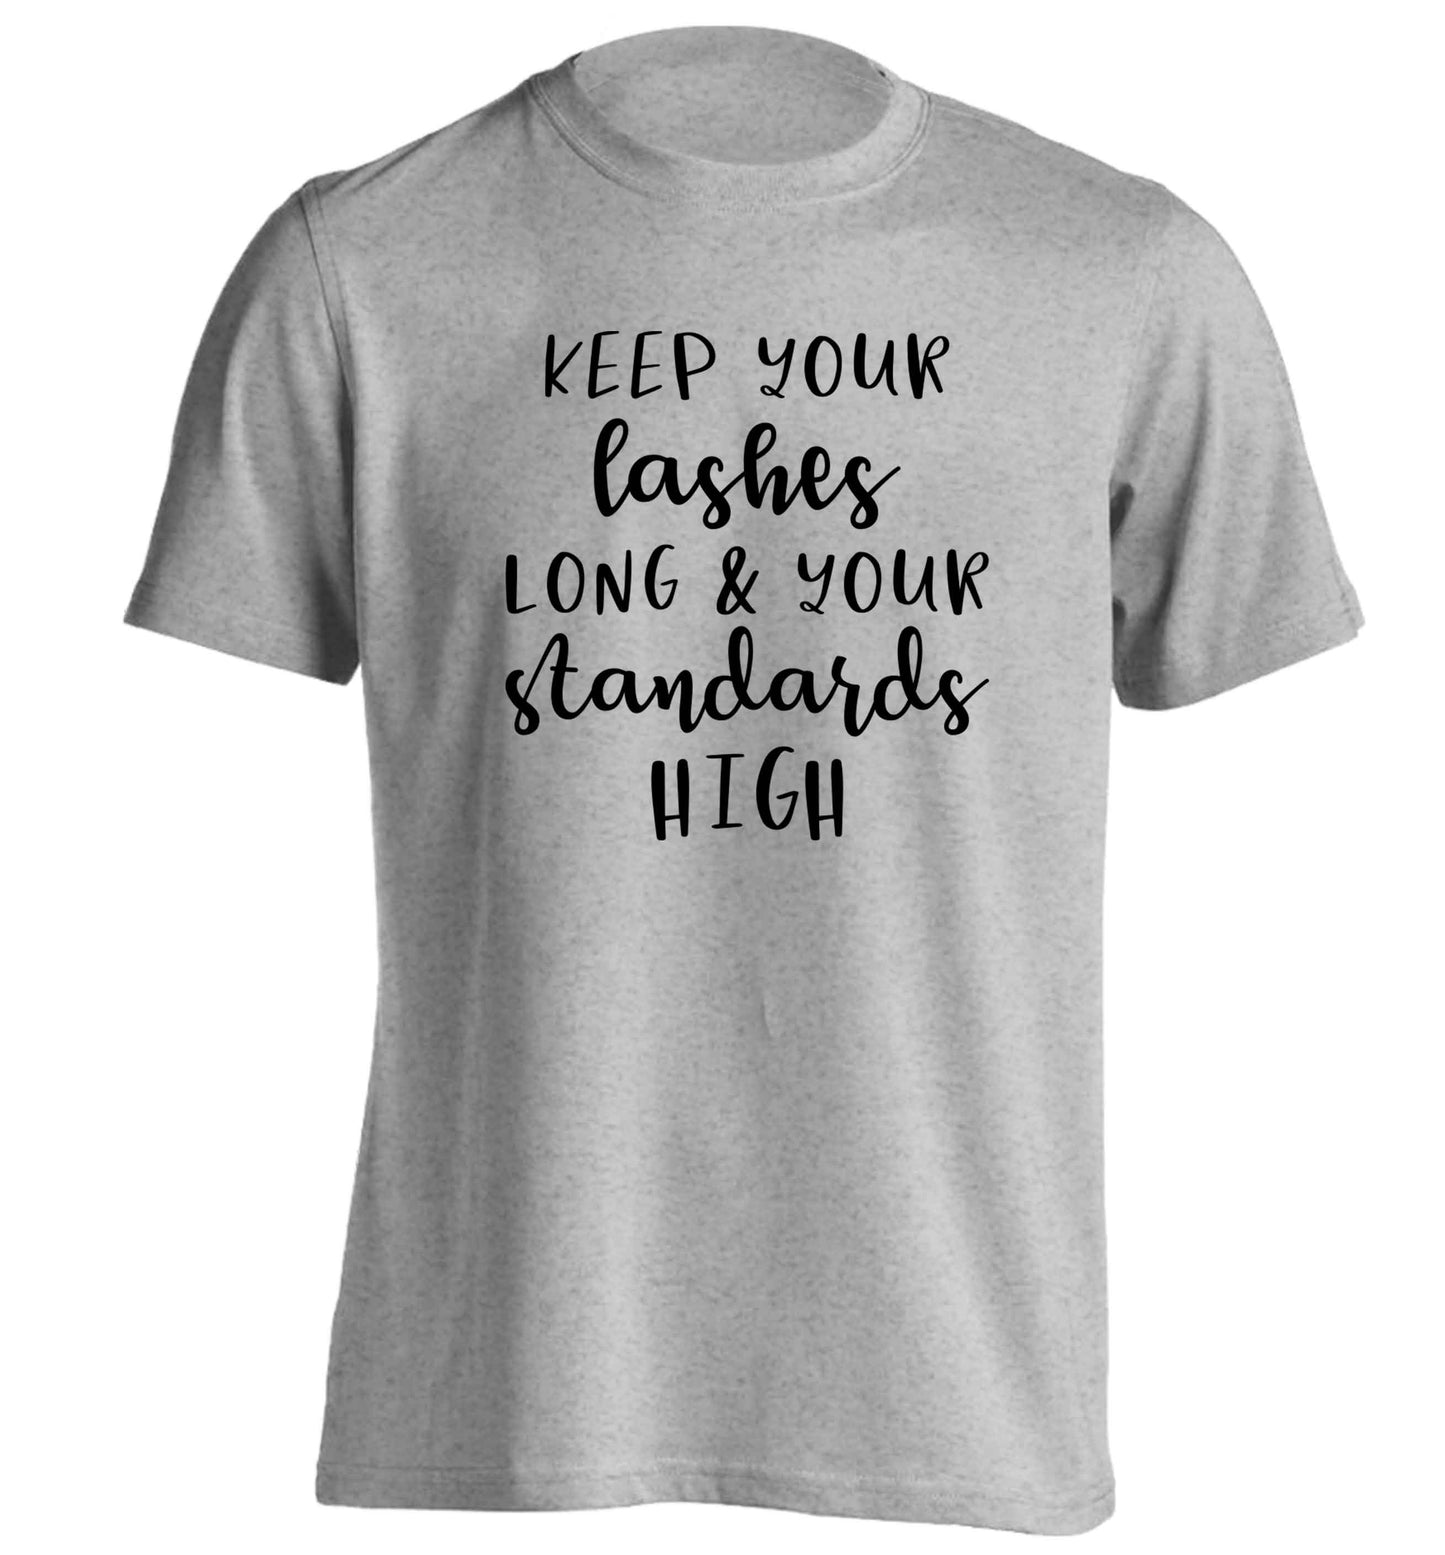 Keep your lashes long and your standards high adults unisex grey Tshirt 2XL